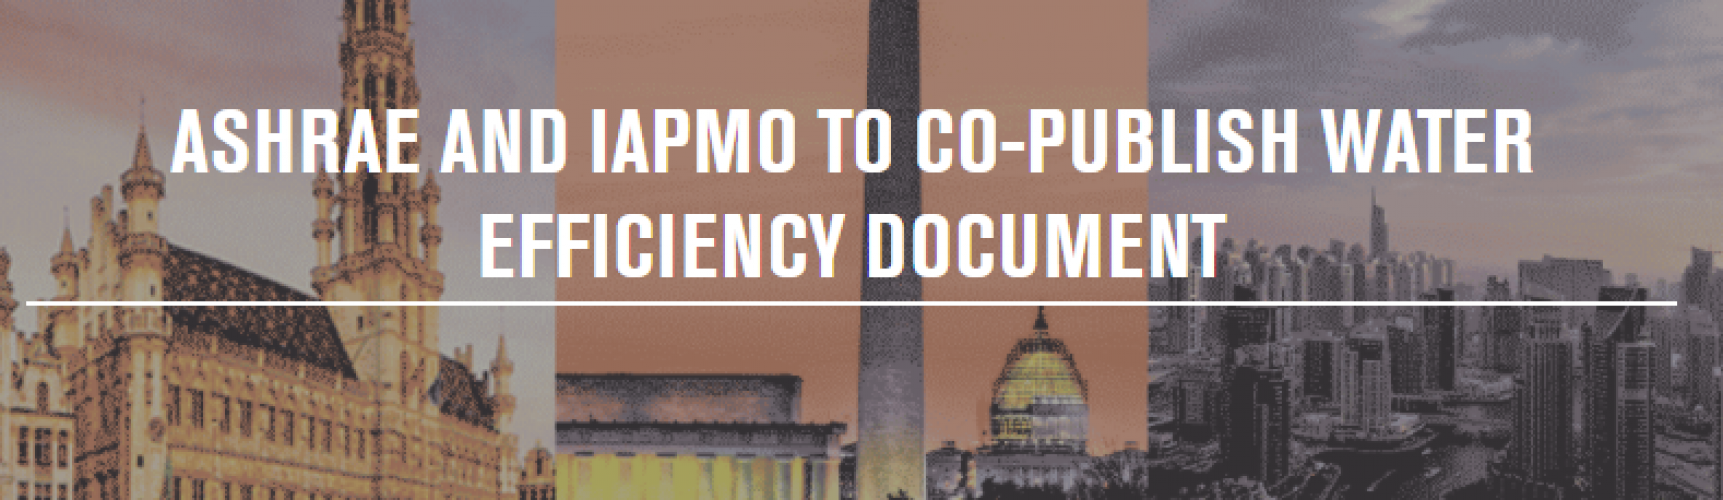 ASHRAE and IAPMO To Co-Publish Water Efficiency Document